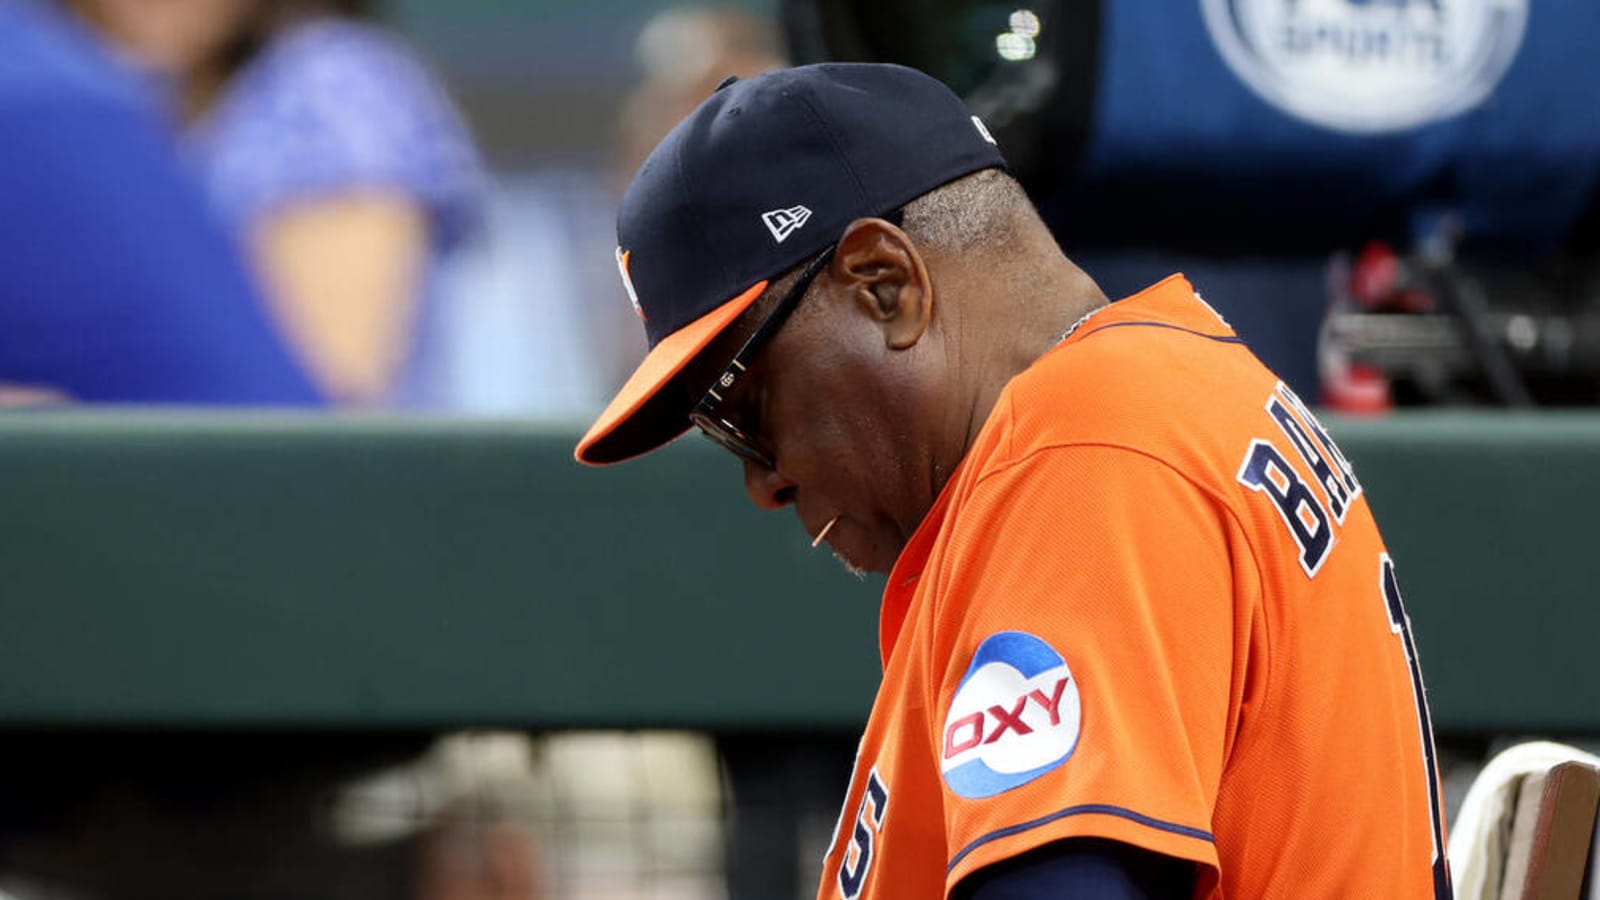 Astros' Baker plans to step away from managing following loss